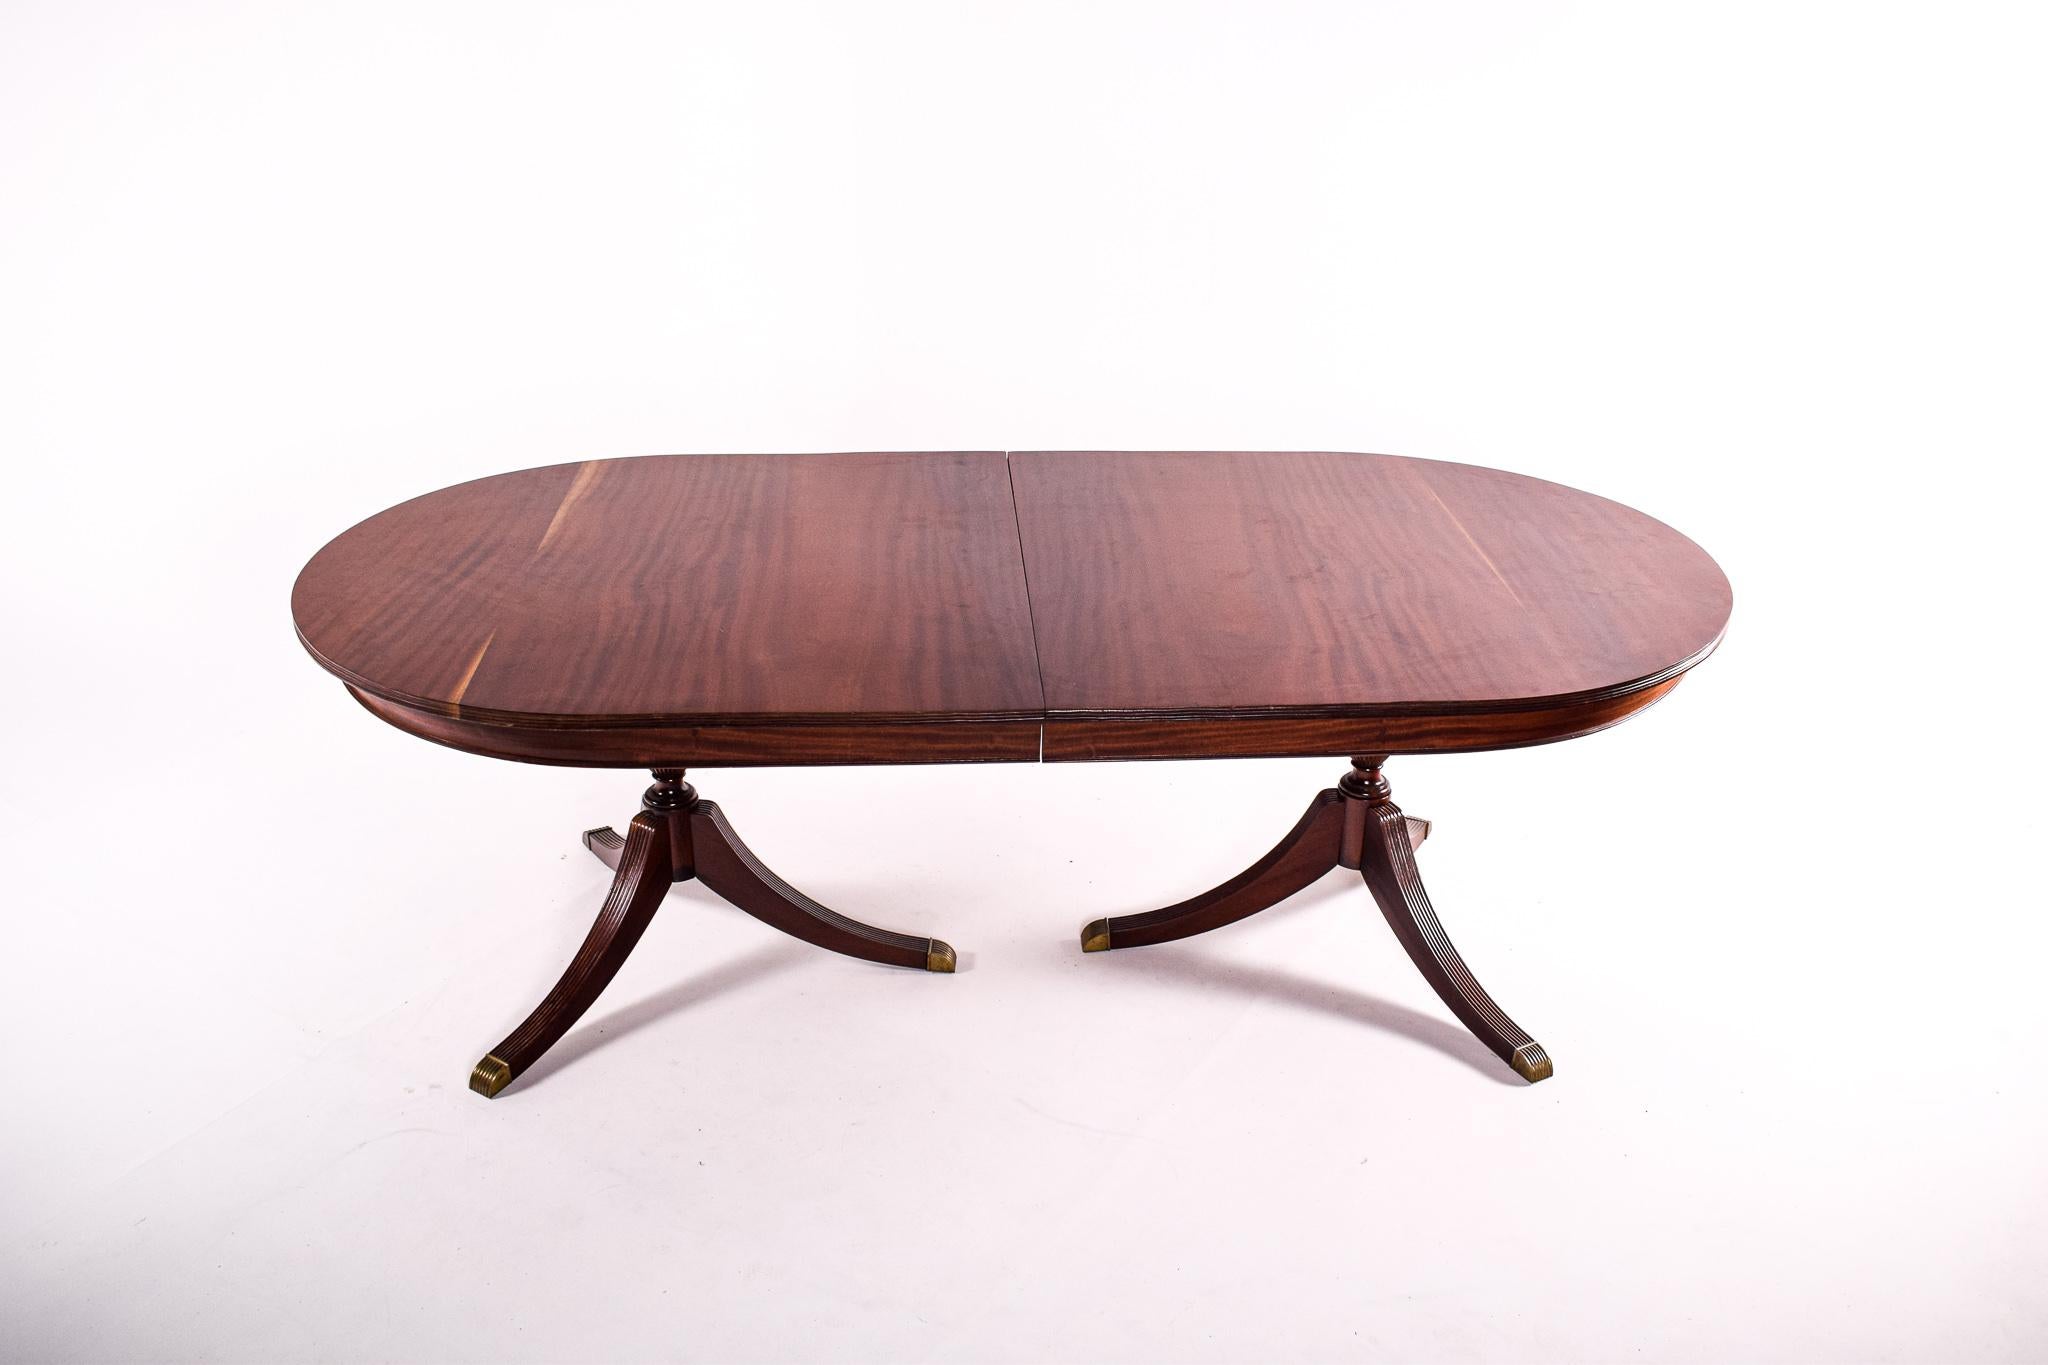  This stately dining table is a modern homage to the classic design sensibilities of 18th-century England. Showcasing the elegance and grandeur of that era, the table features a generous oval mahogany top with a rich patina that speaks to its age